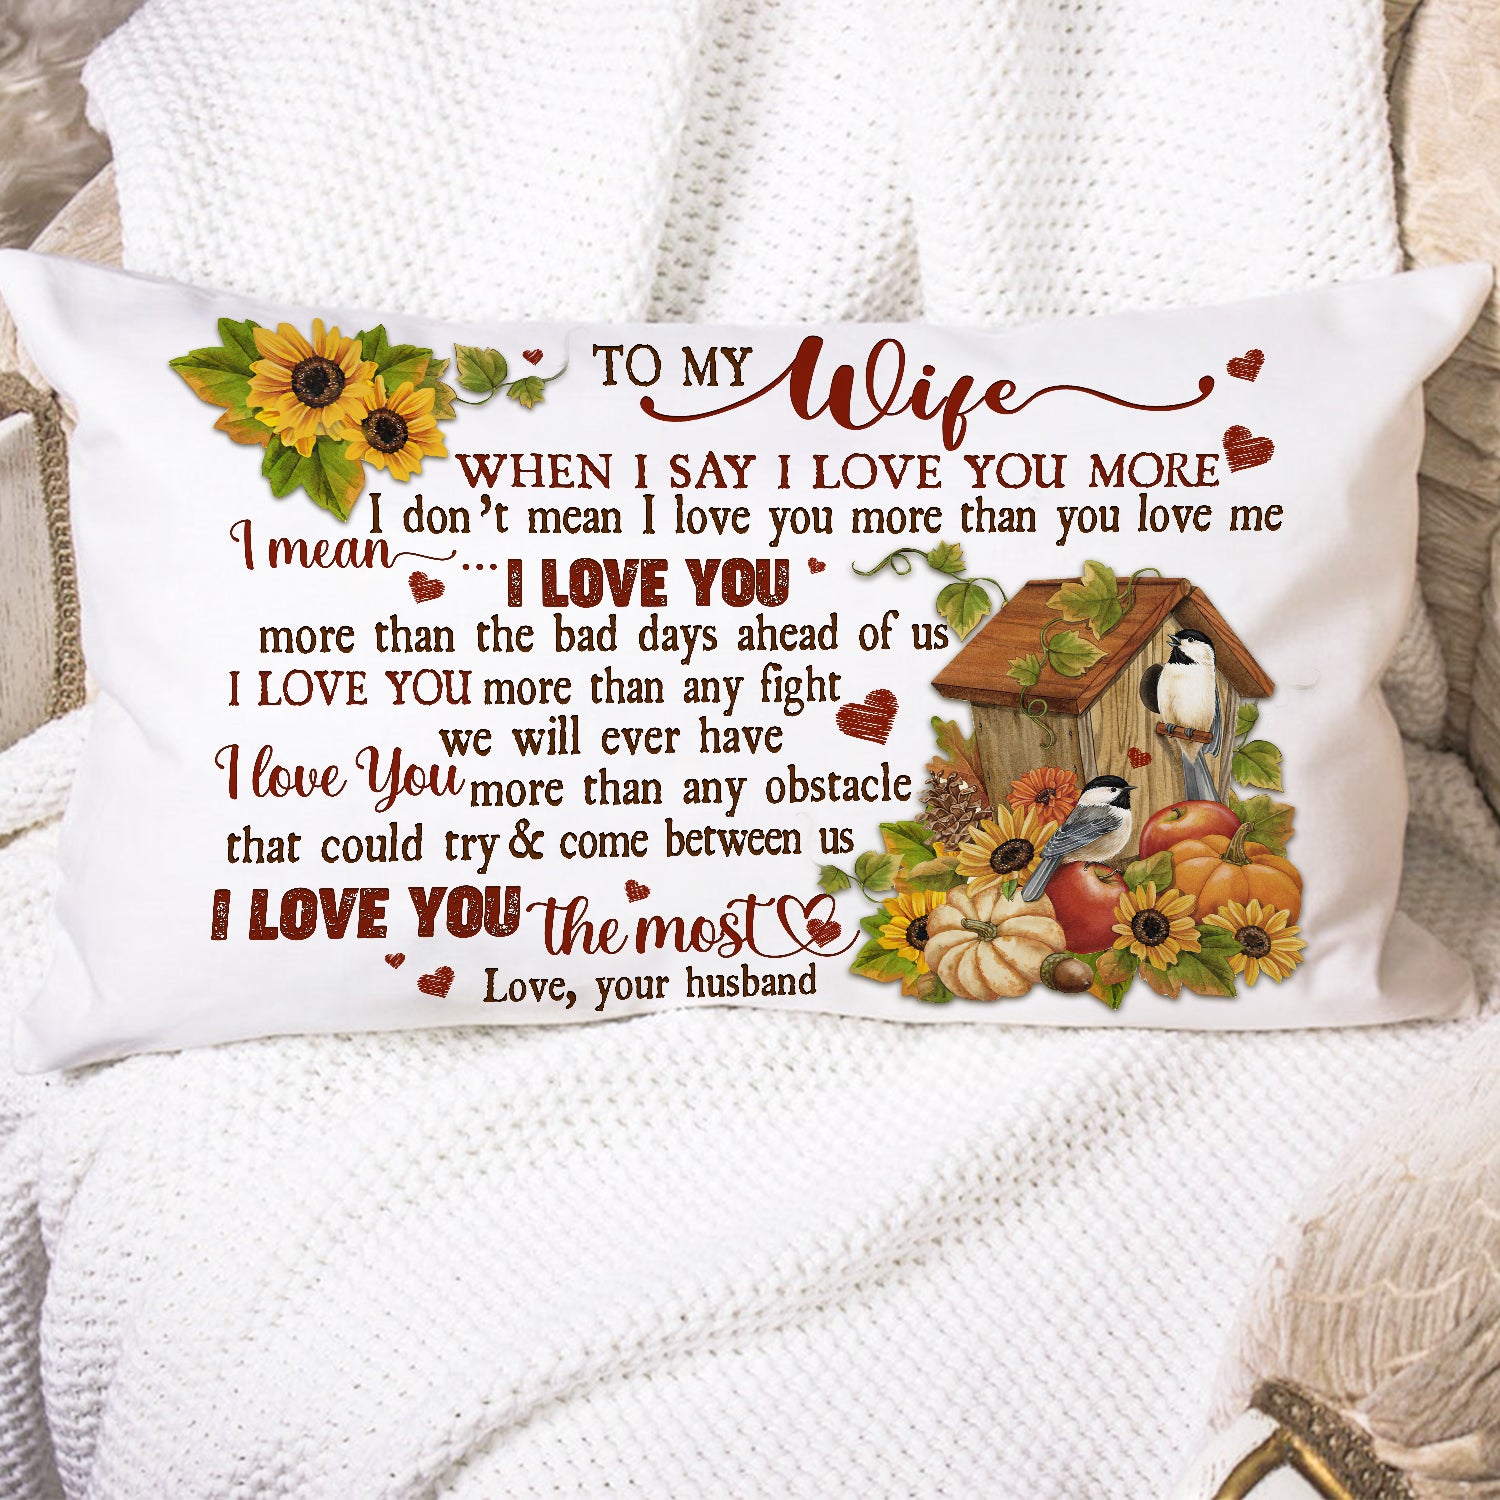 To my wife - Bird couple - I love you the most - Couple Pillow